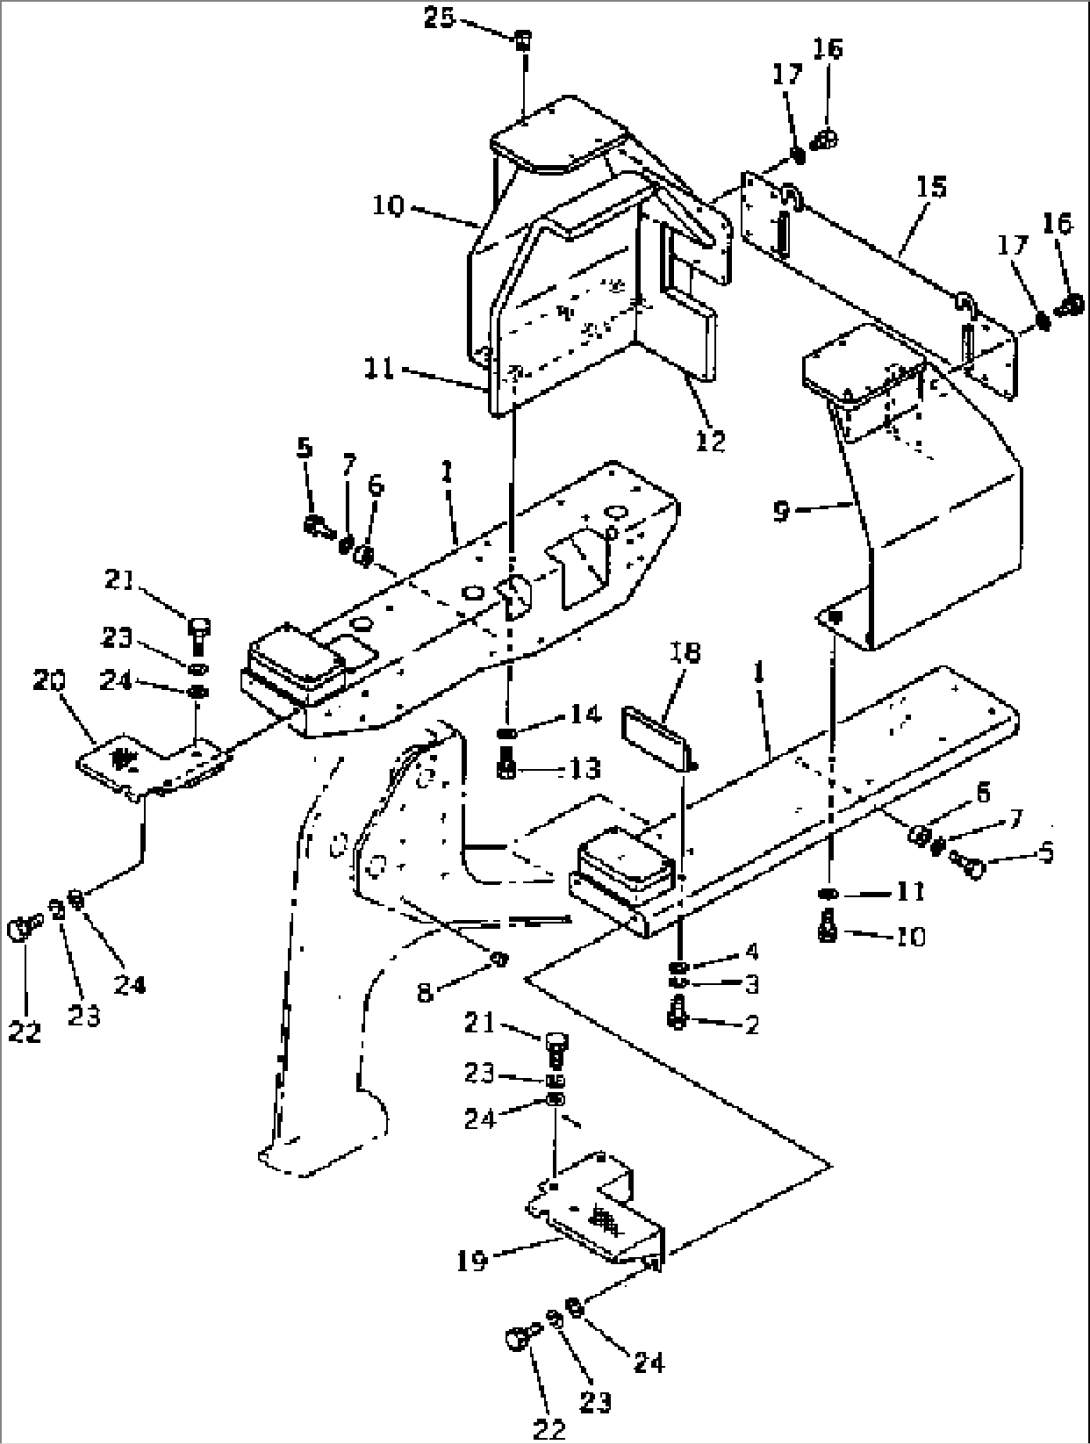 ROPS BRACKET (ABLE TO AVAIL FOR ROPS) (NOISE SUPPRESSION FOR EC)(#80338-)